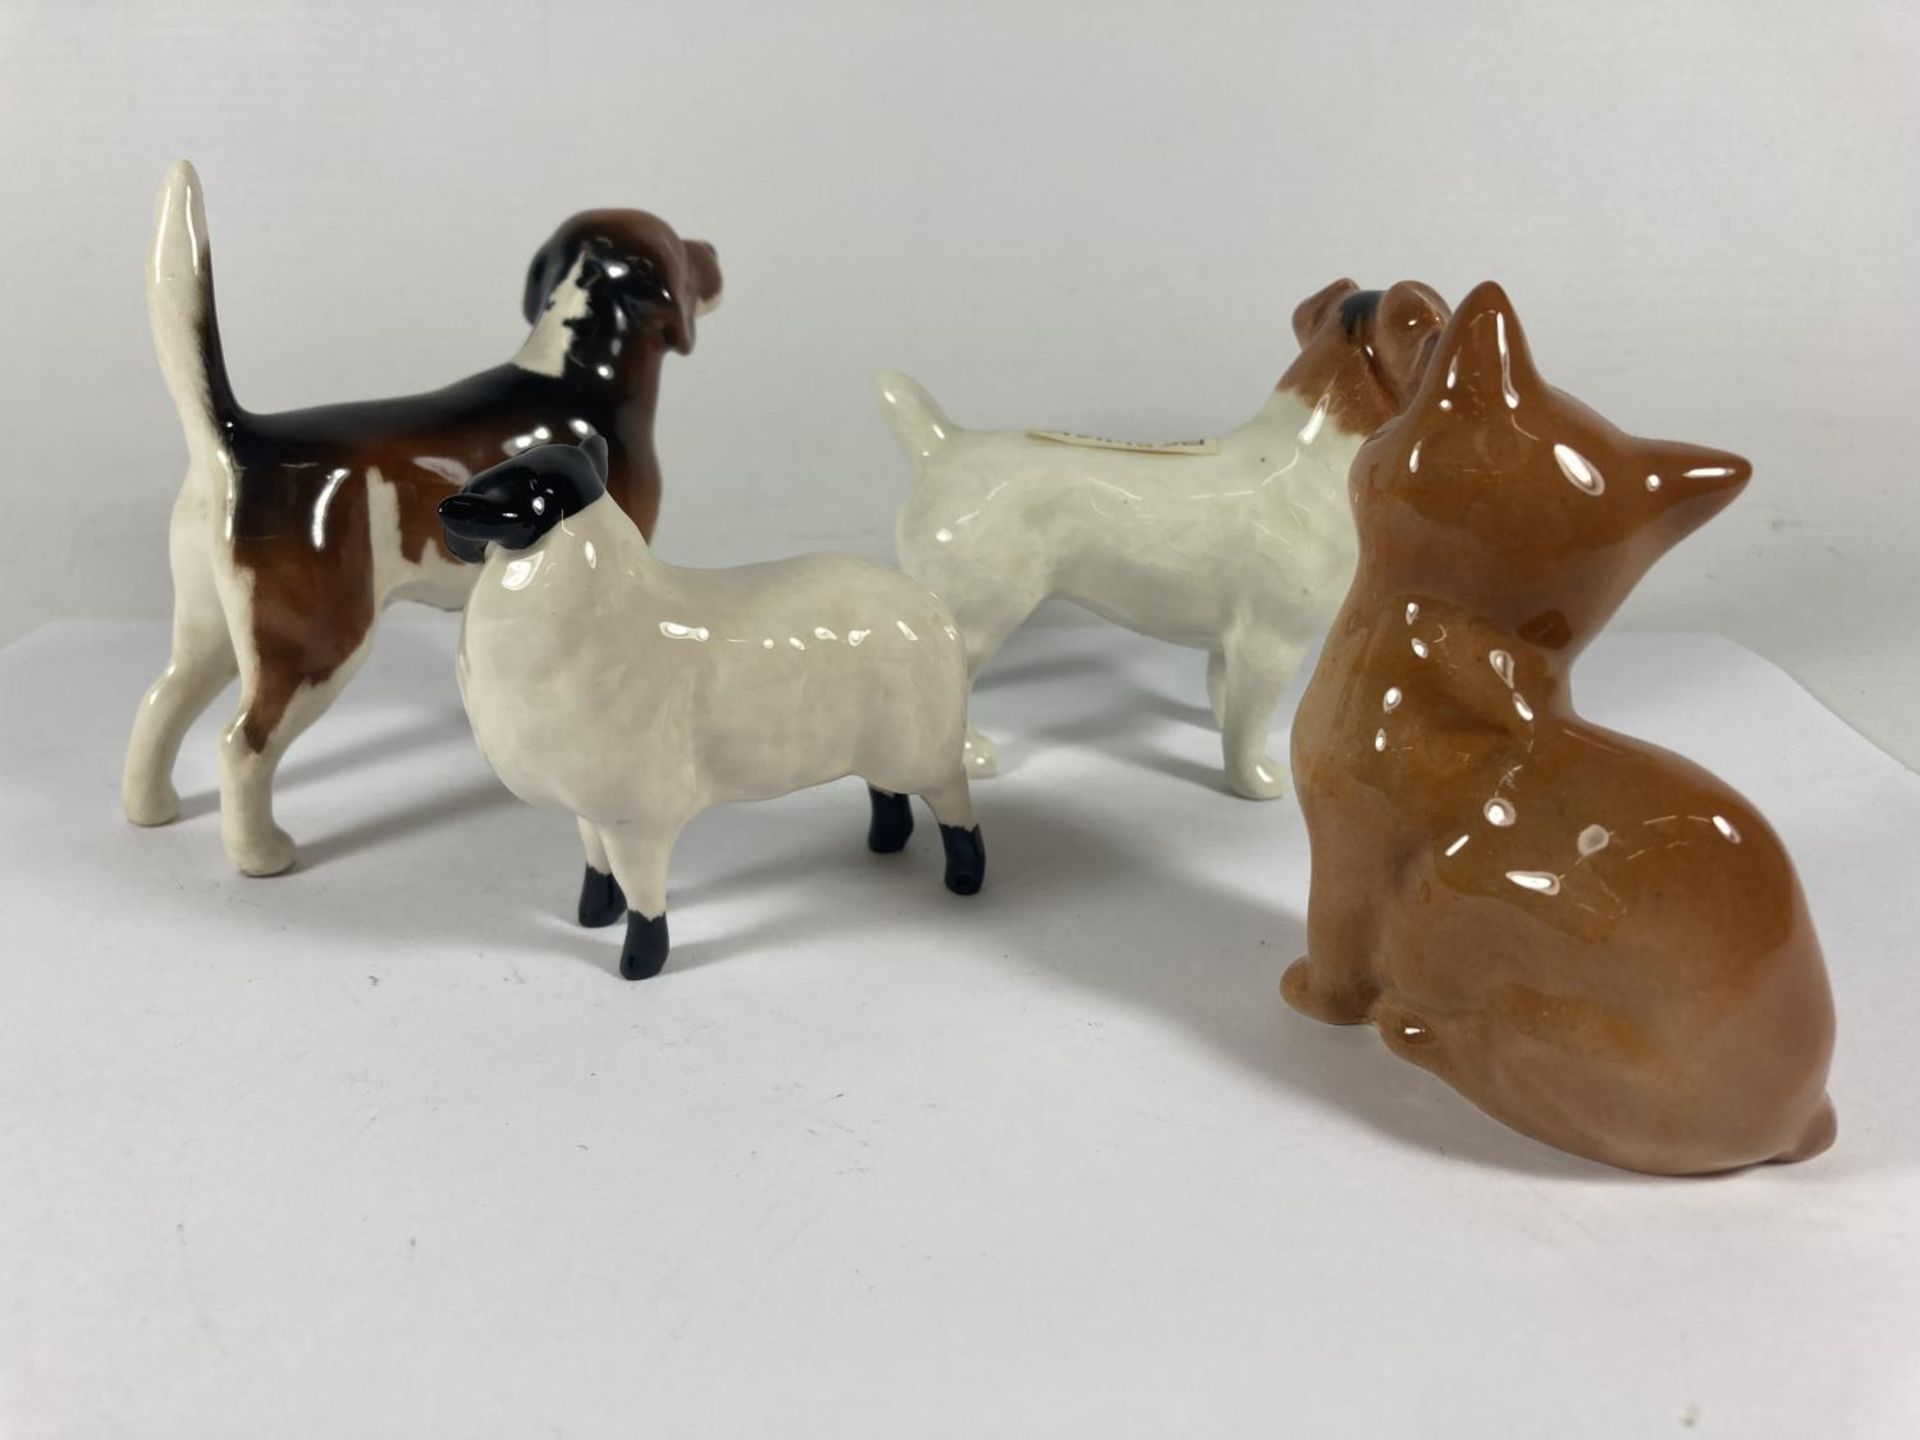 FOUR BESWICK FIGURES TO INCLUDE A JACK RUSSEL, HOUND, A LAMB AND A CAT - Image 4 of 6